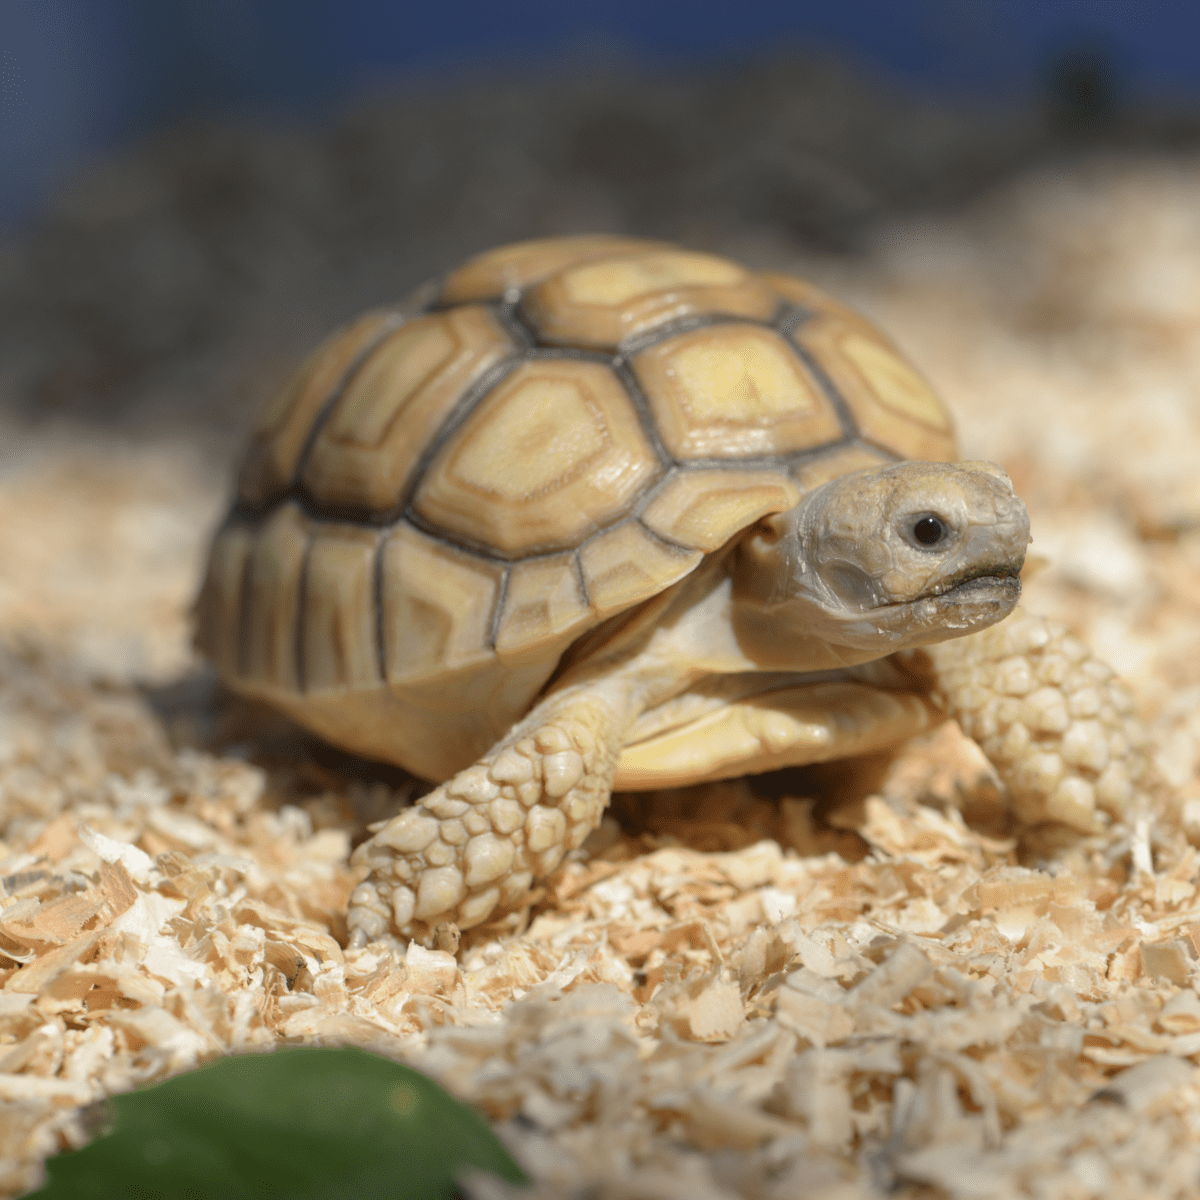 help i wanted to know if my Russian tortoises shell is okay , we bought him  from pet super market and they said he was healthy but idk if i should be